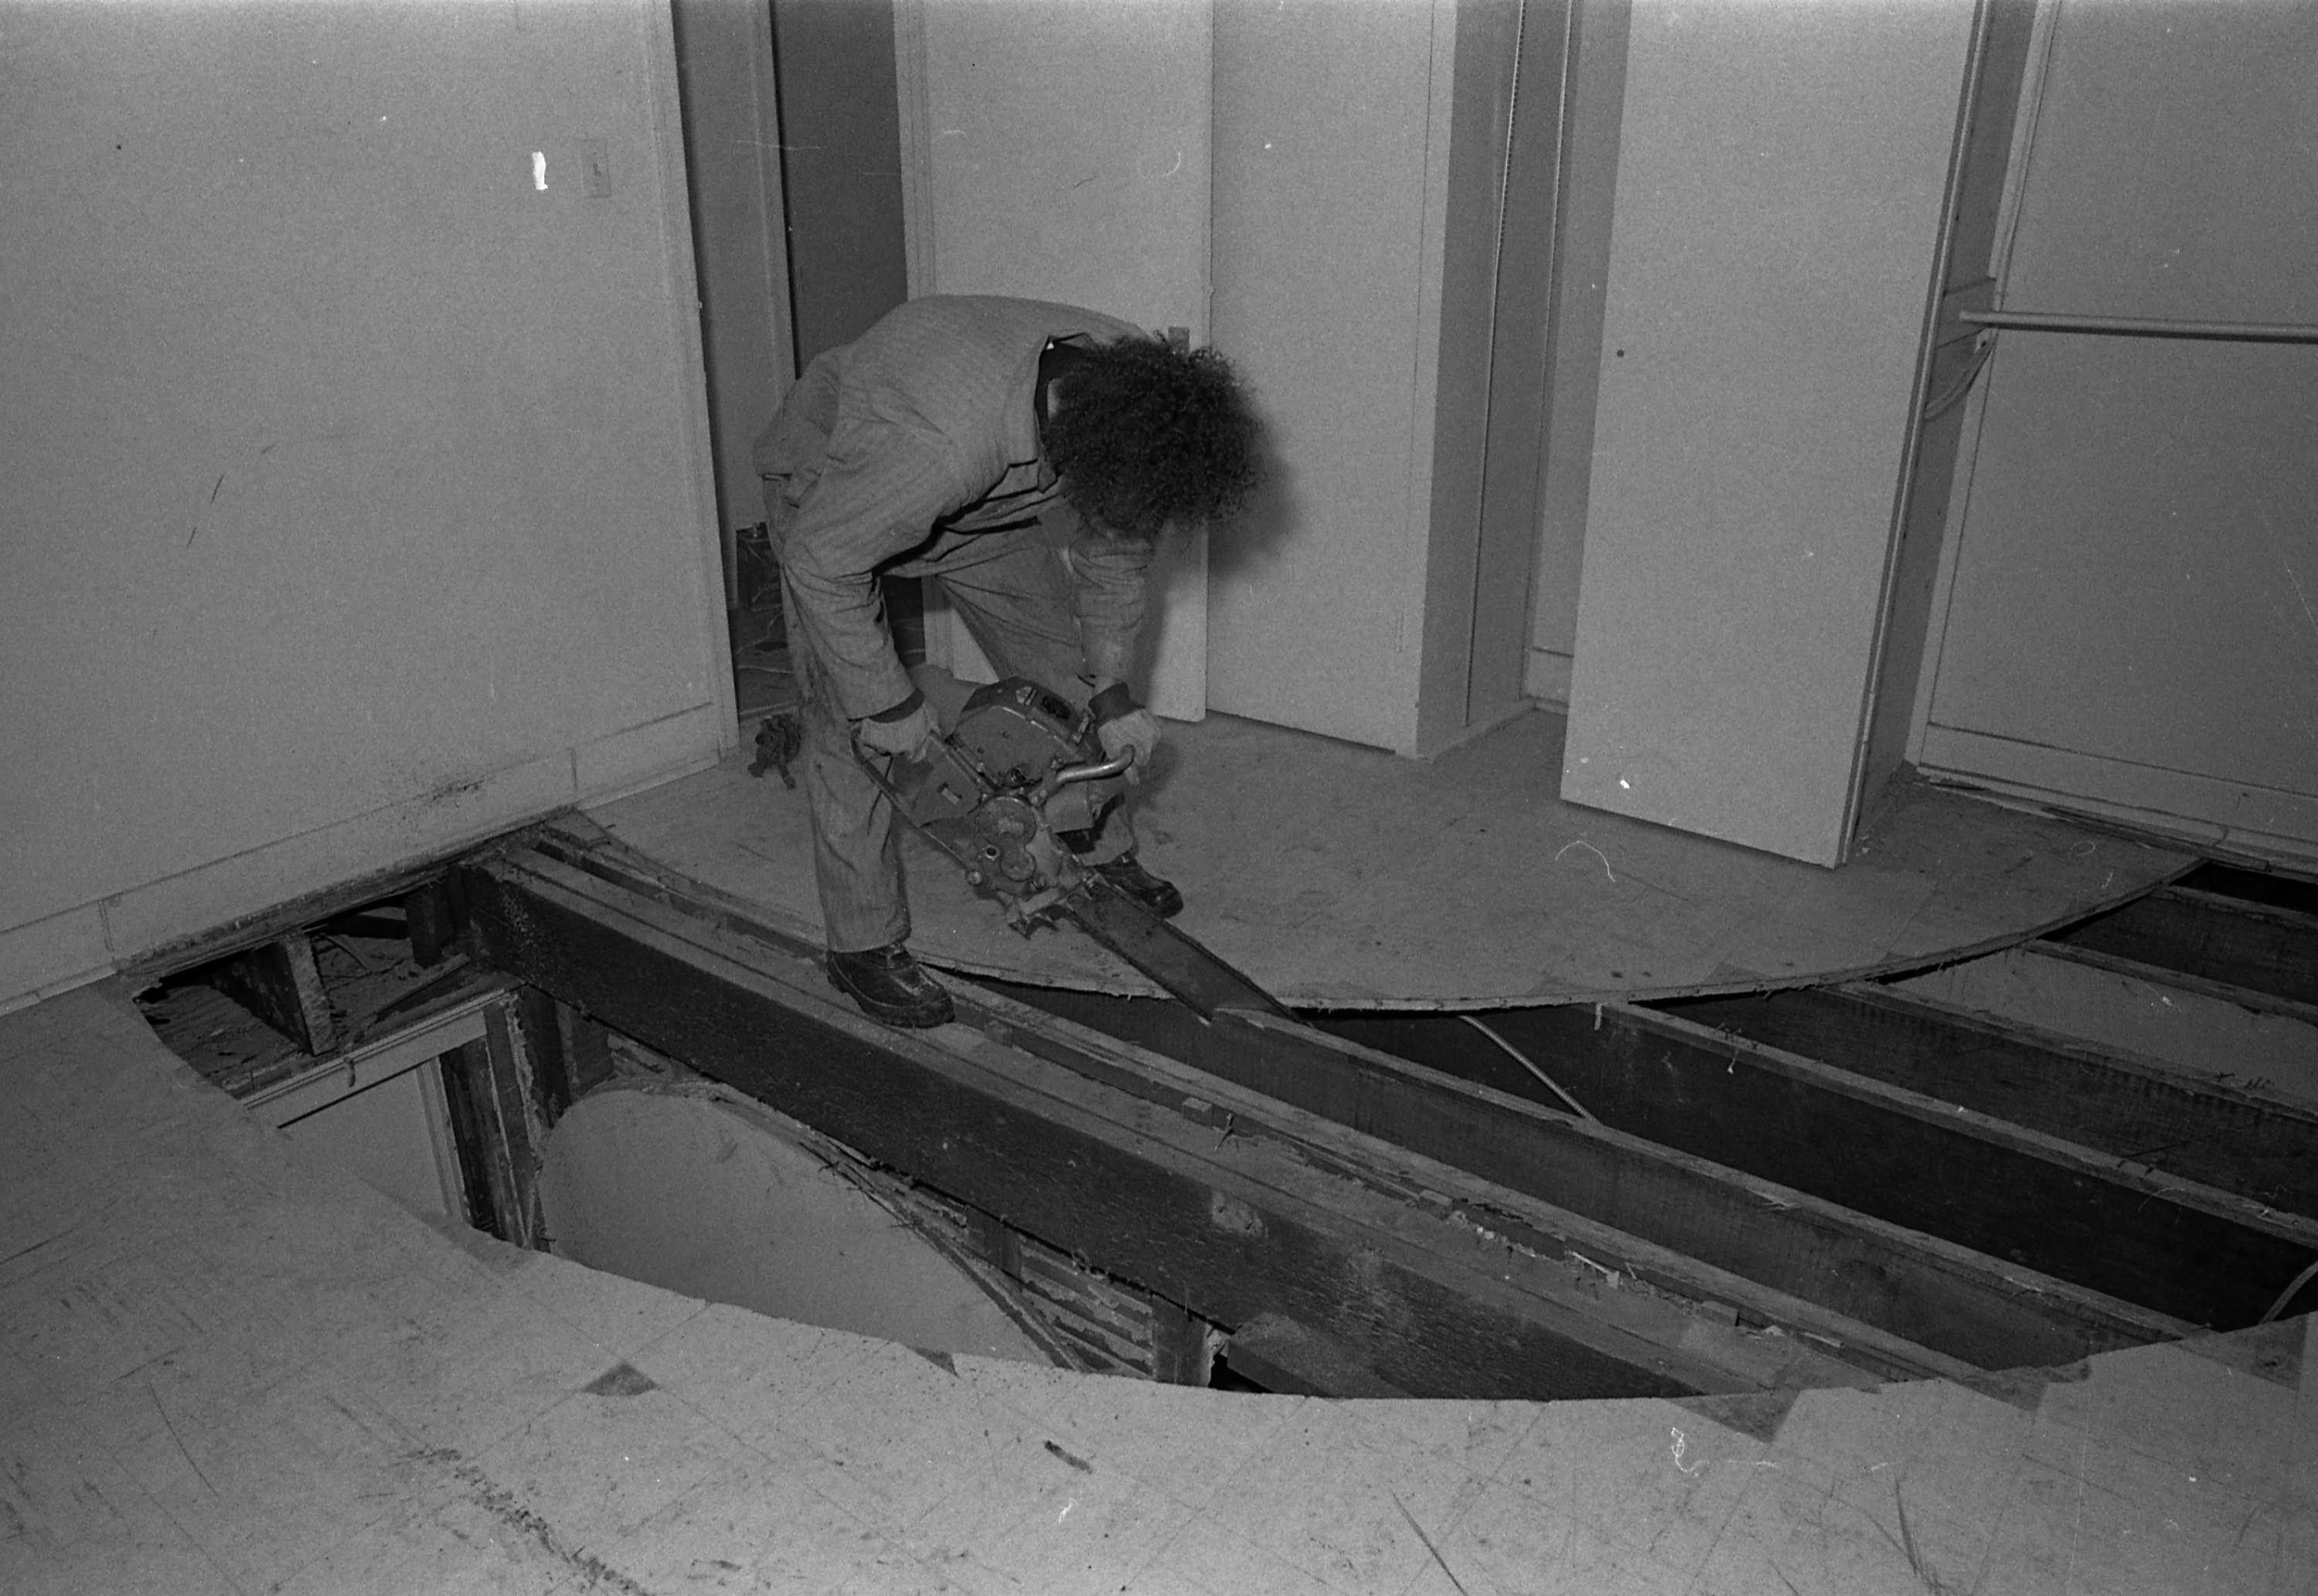 A person uses a chainsaw to cut through floorboards.